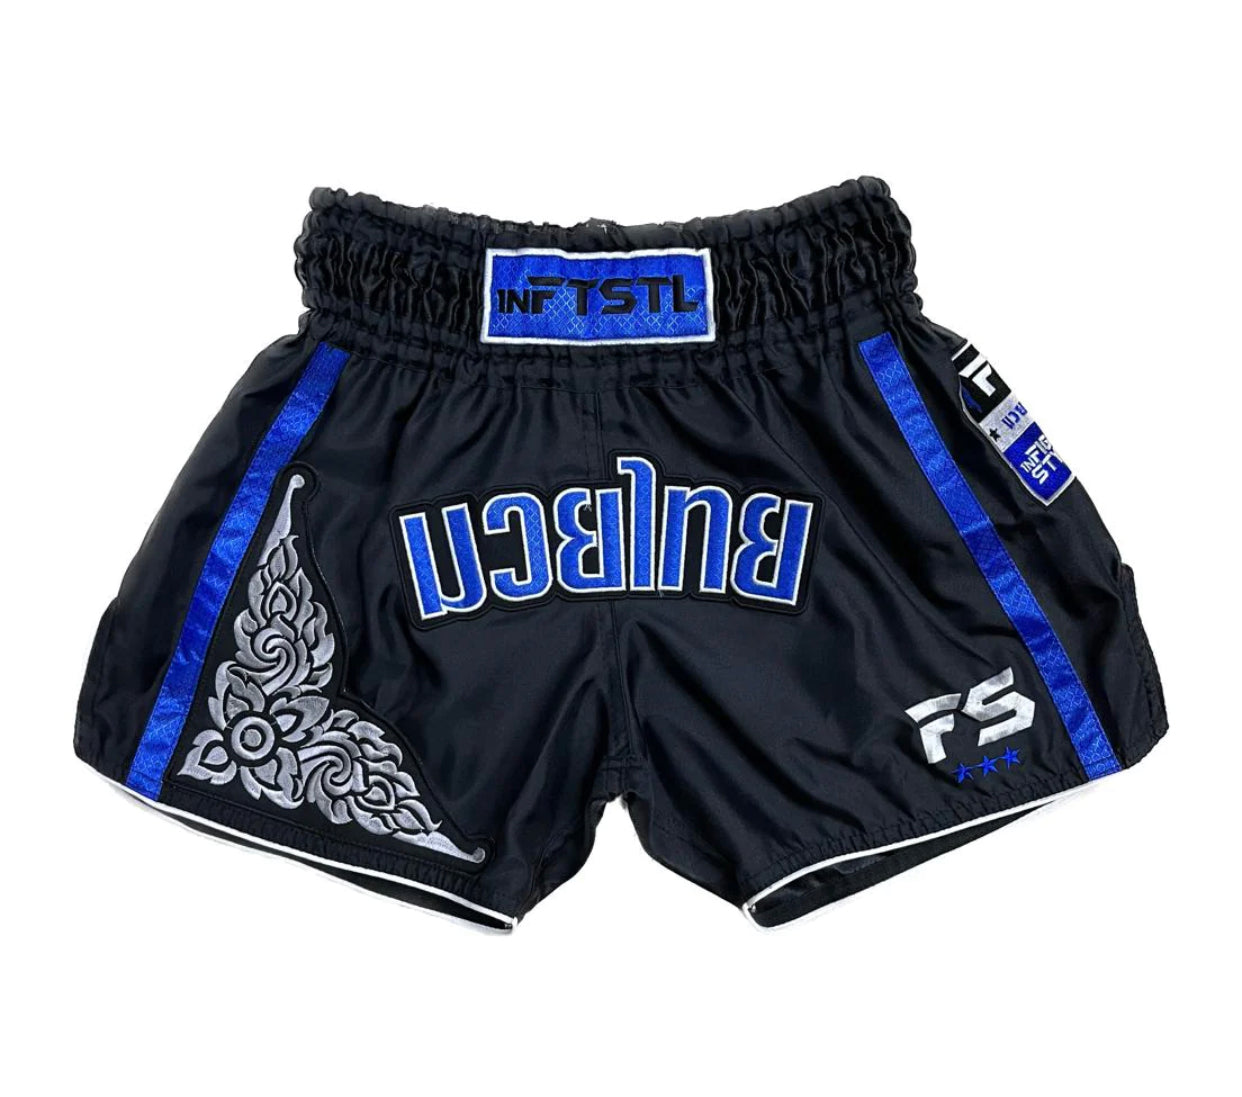 Infightstyle RT20 MuayThia Athletic Training Short - Black with Blue Edition